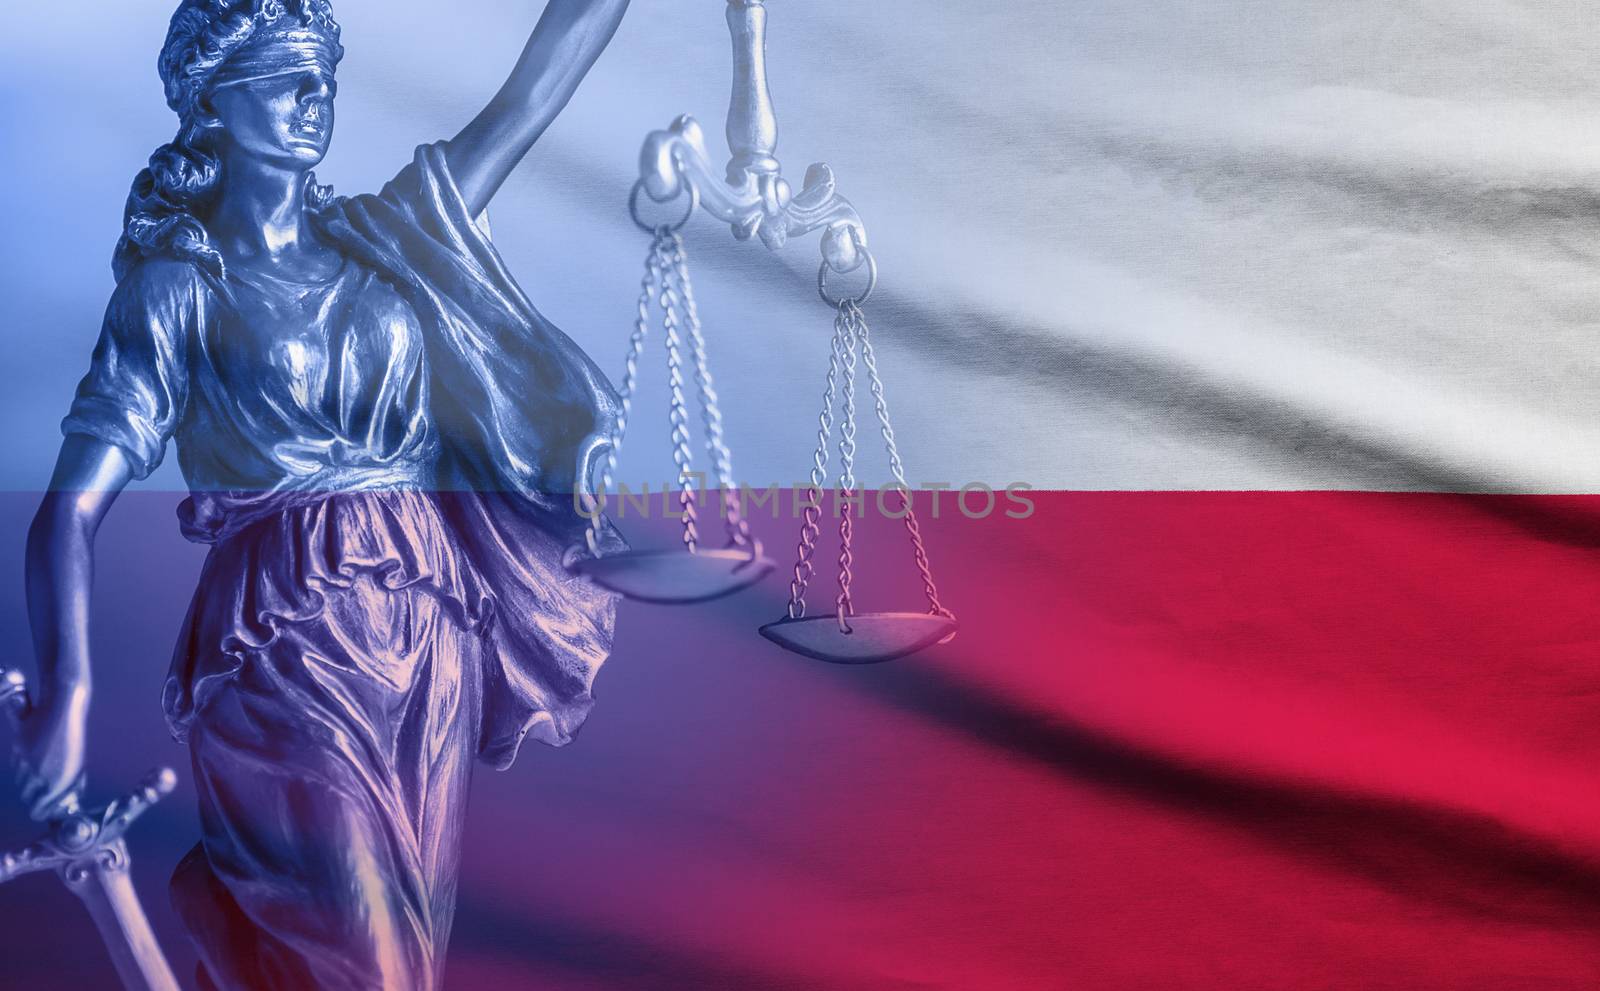 Flag of Poland with figure of Justice with scales and sword superimposed conceptual of law and order